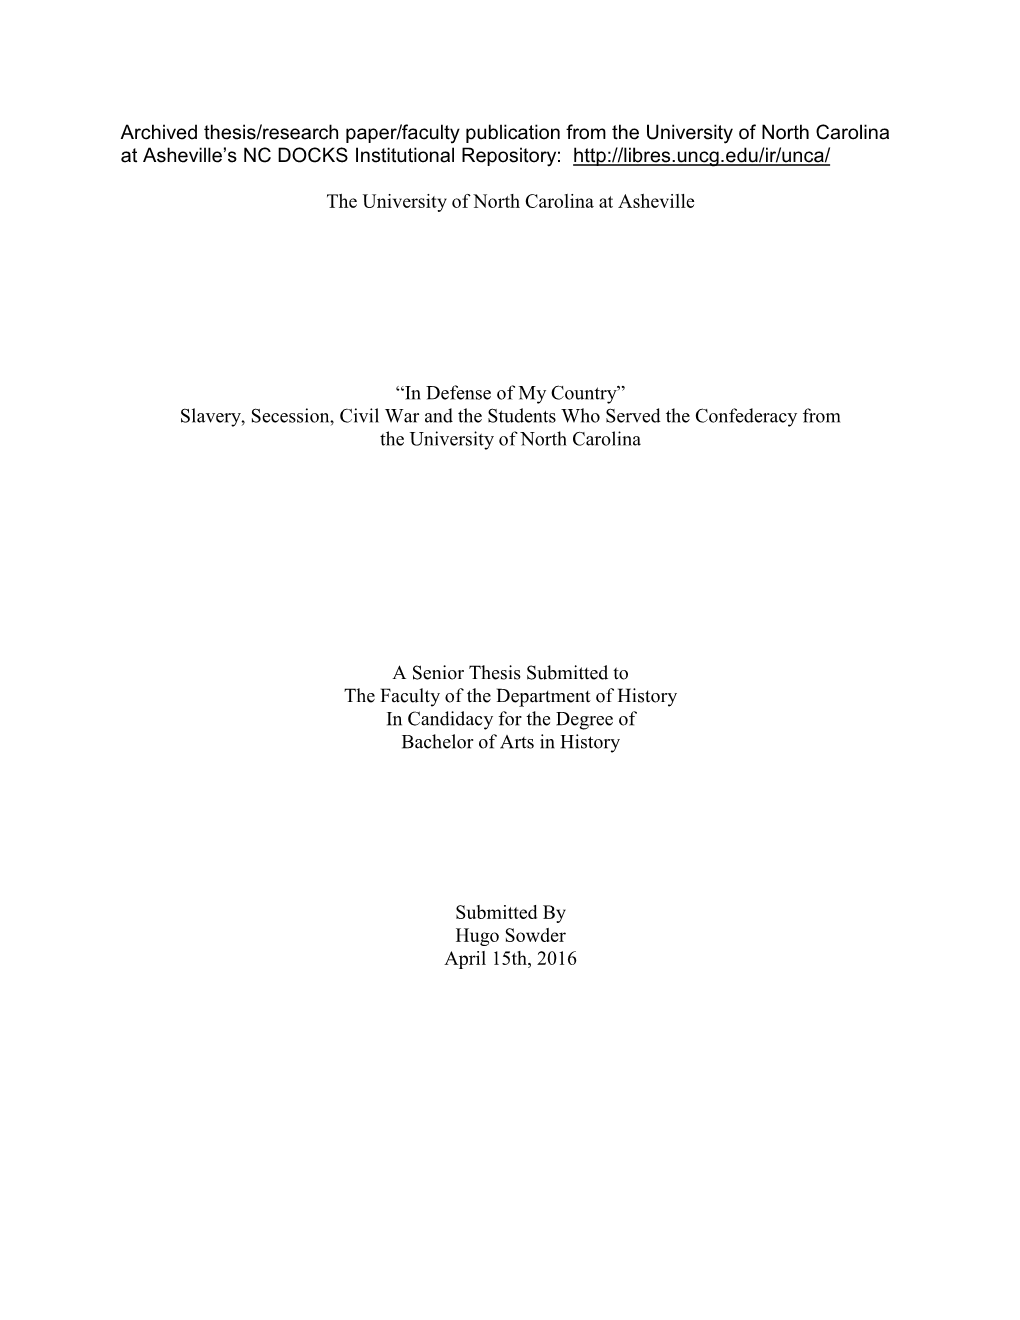 Archived Thesis/Research Paper/Faculty Publication from The